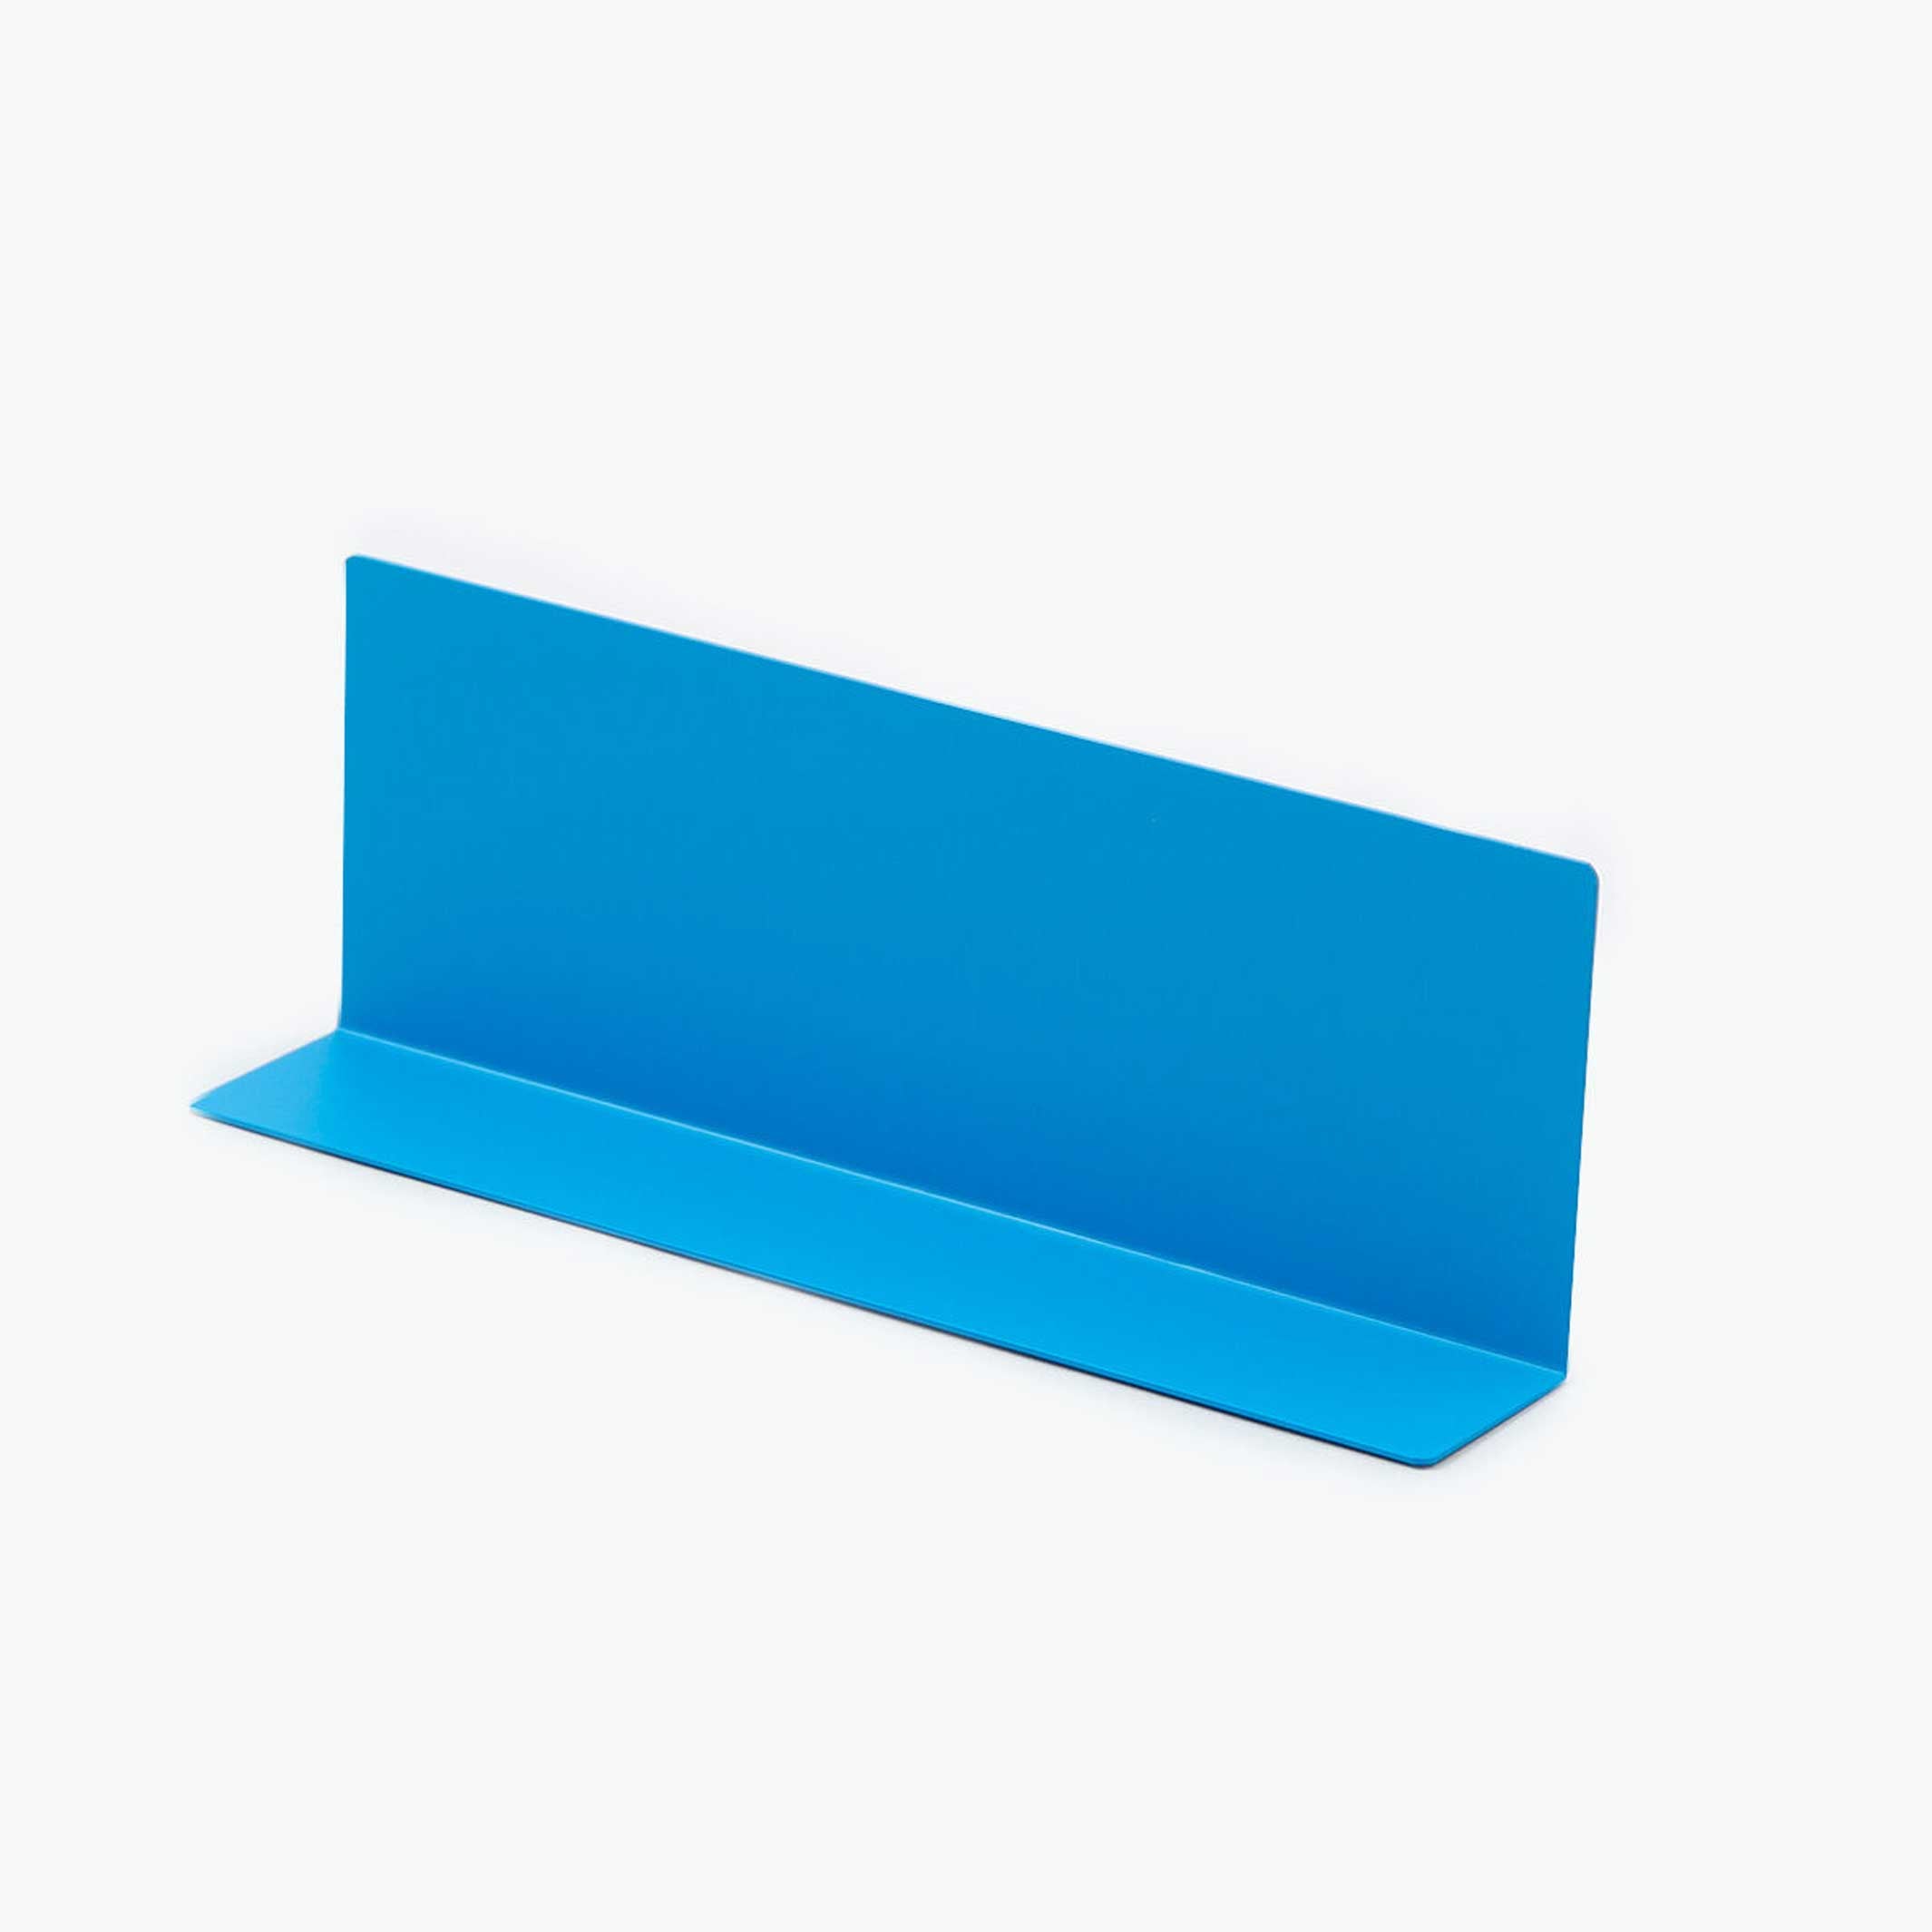 COLOR OBJECT HOTEL | DESK ORGANIZER & TRAYS | Antje Pesel | 100percent